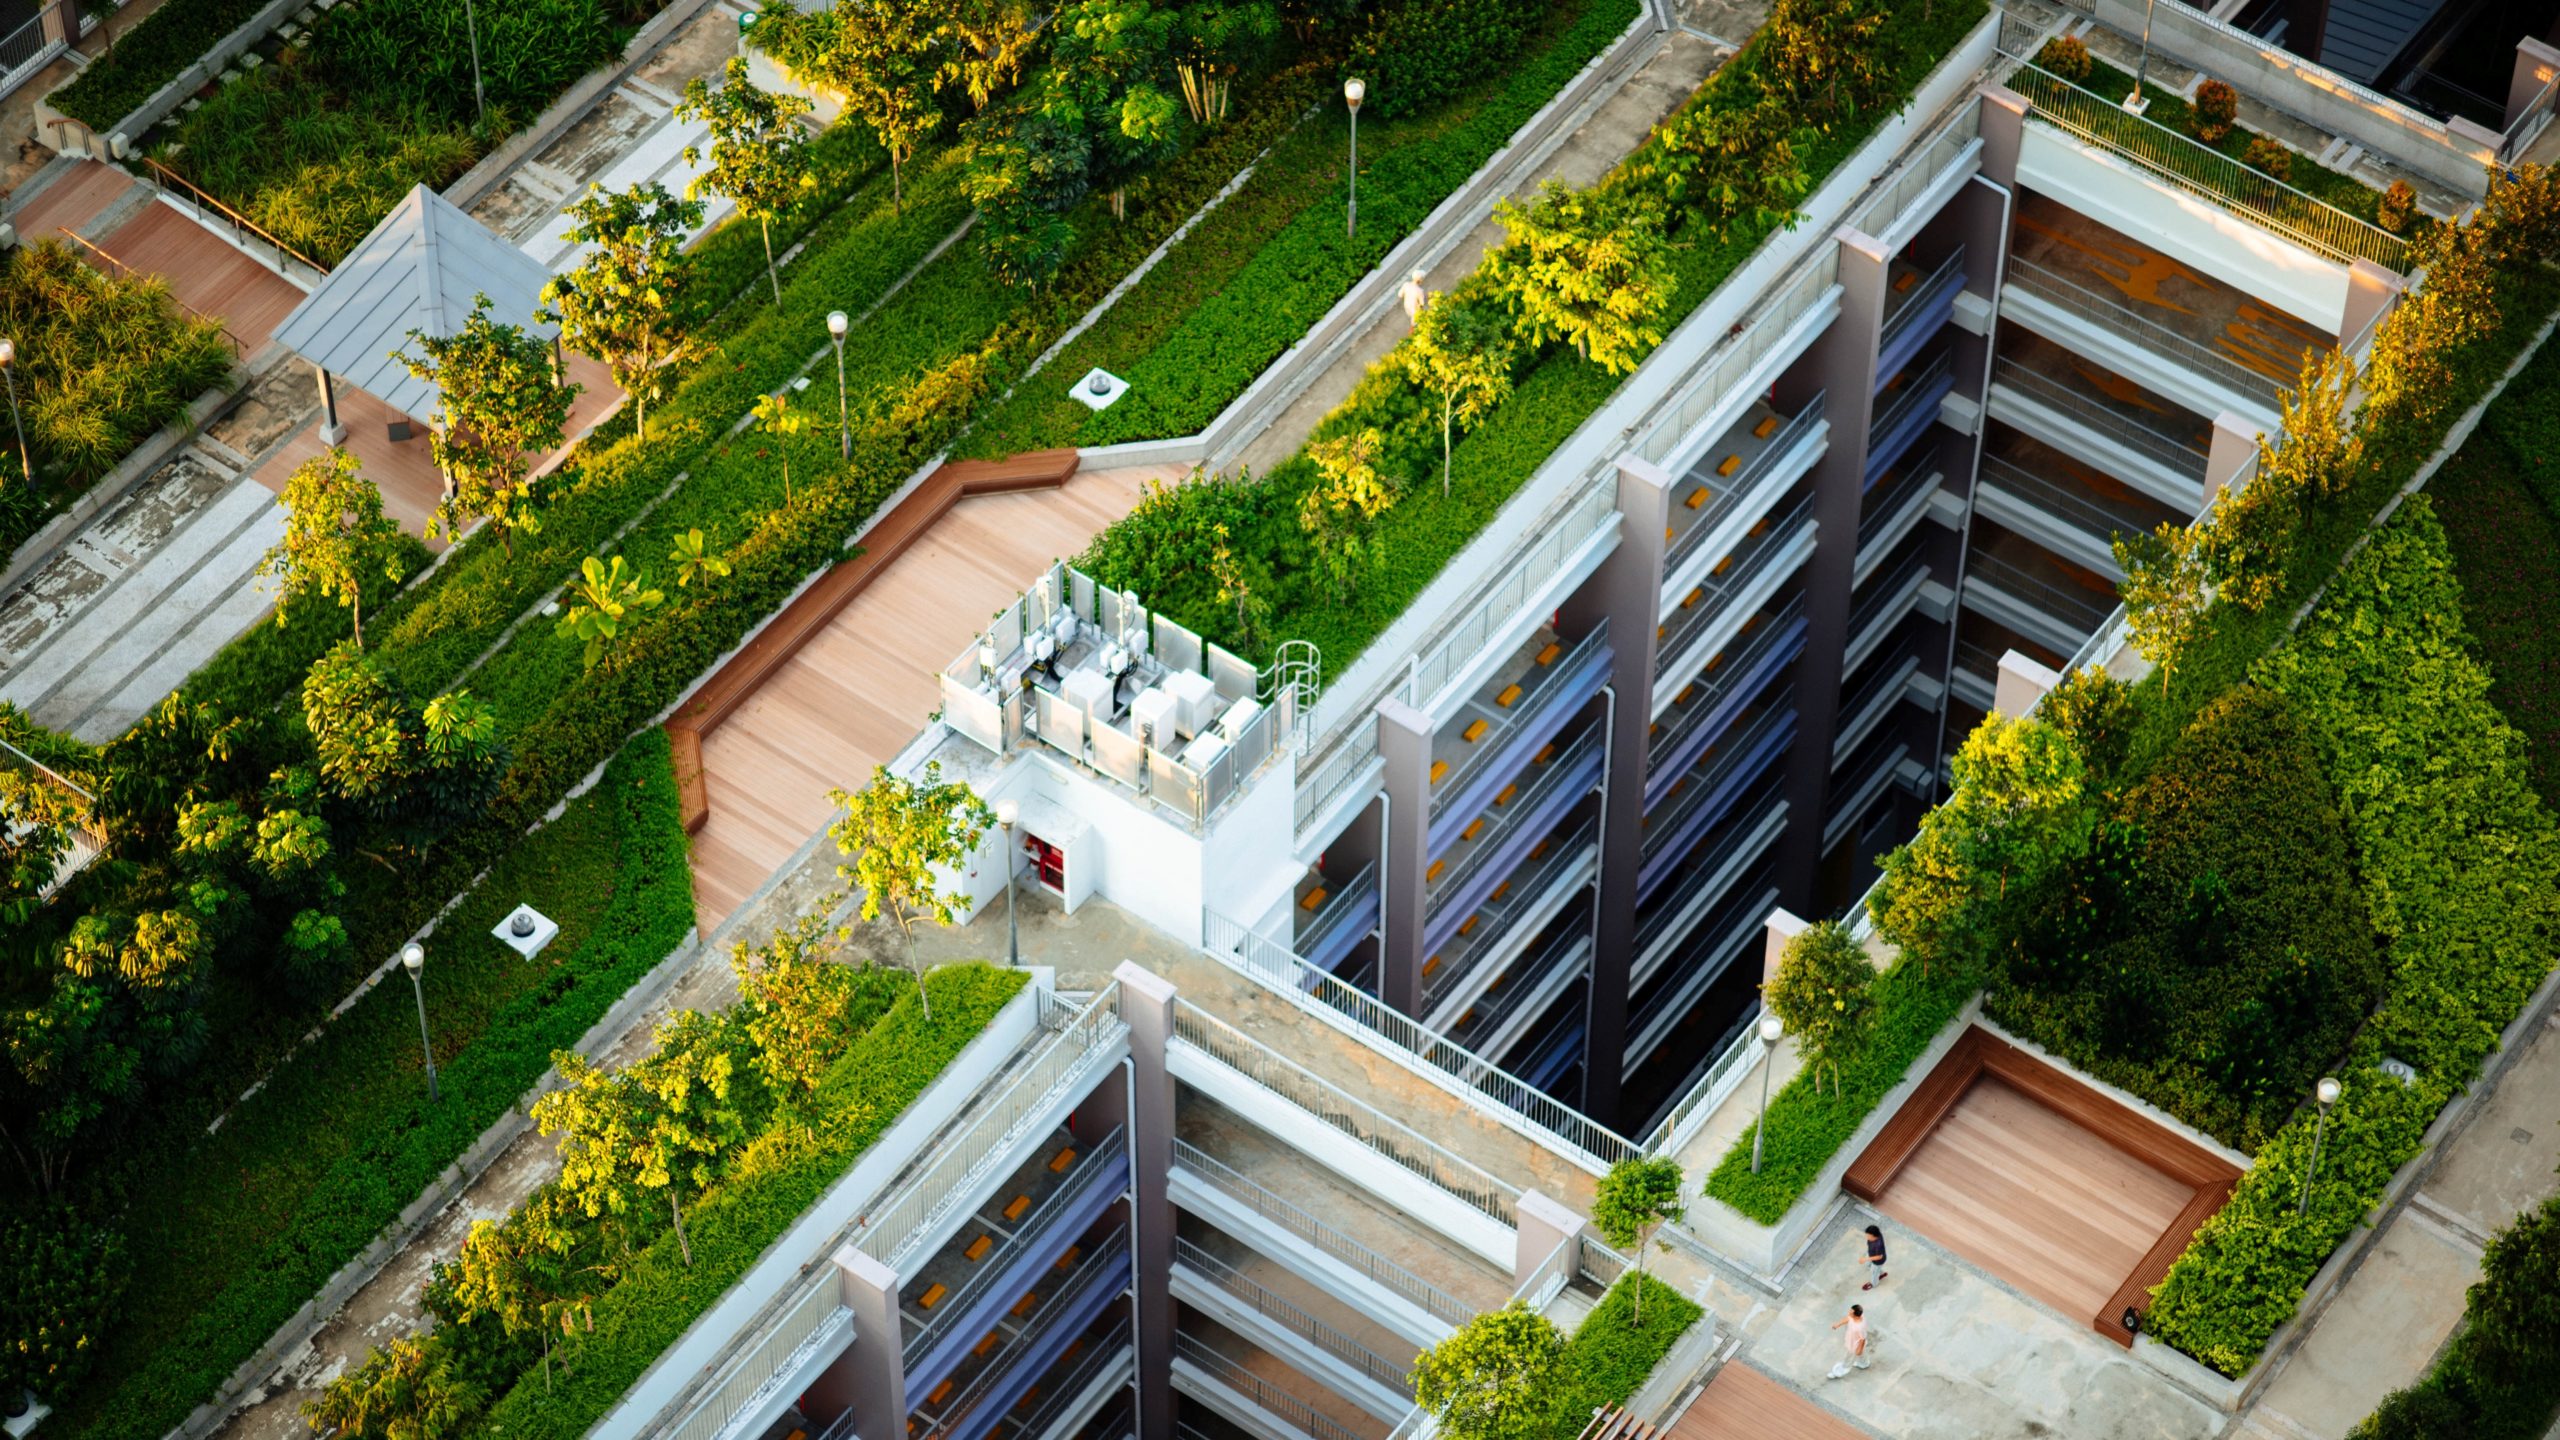 Bird's eye view of a green roof on a city building